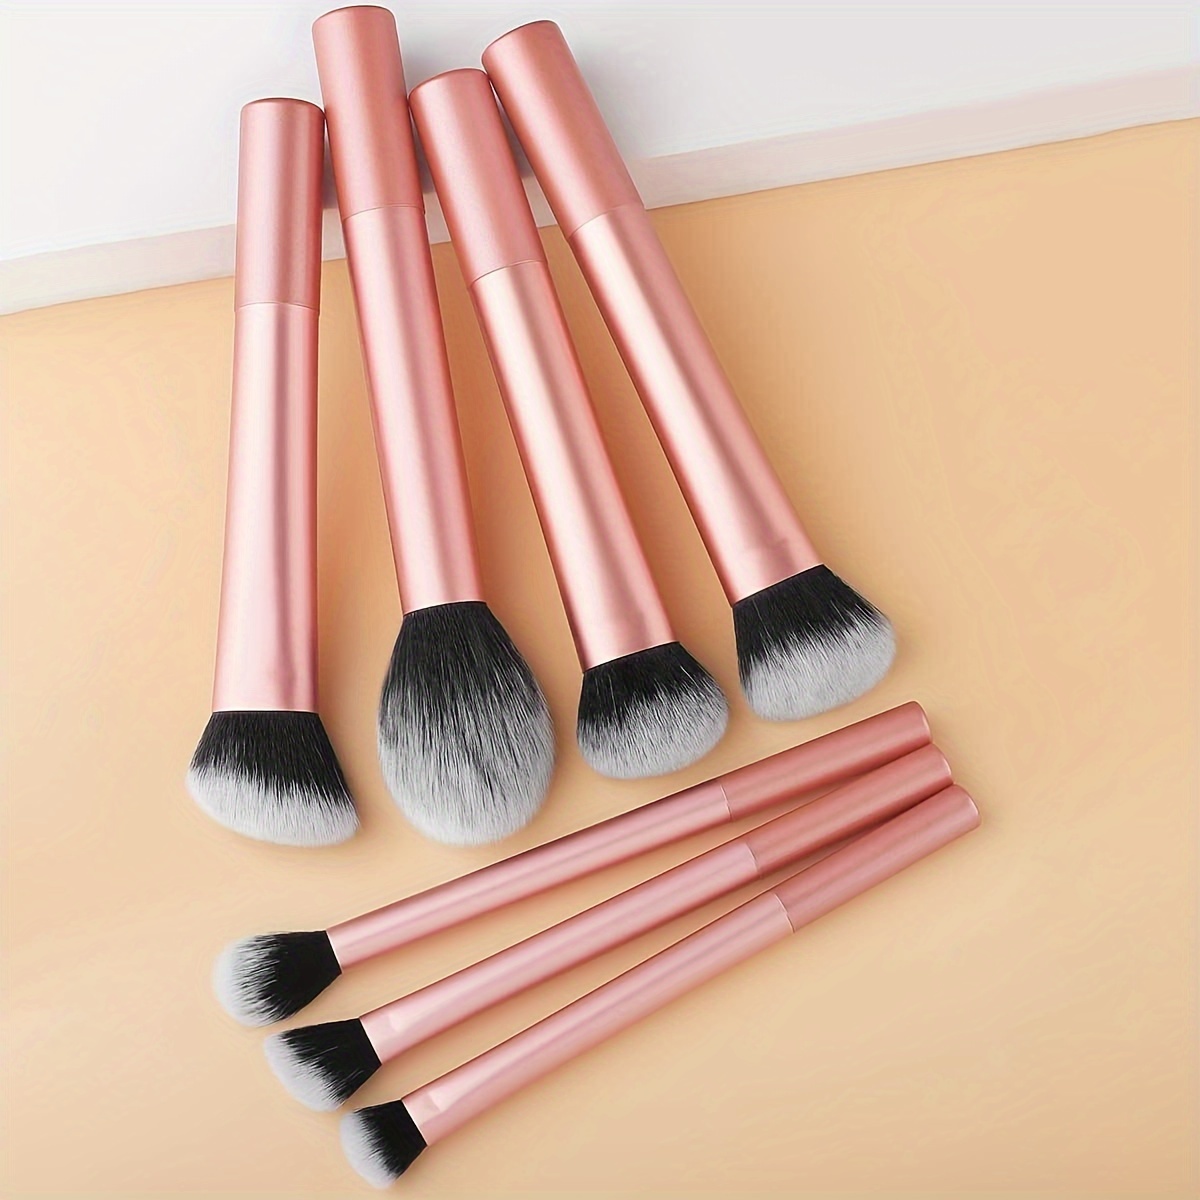 

7pcs Makeup Brush Set, Eyeshadow Brush Face Makeup Brush Multifunctional Beauty Tool For Quick And Easy Application